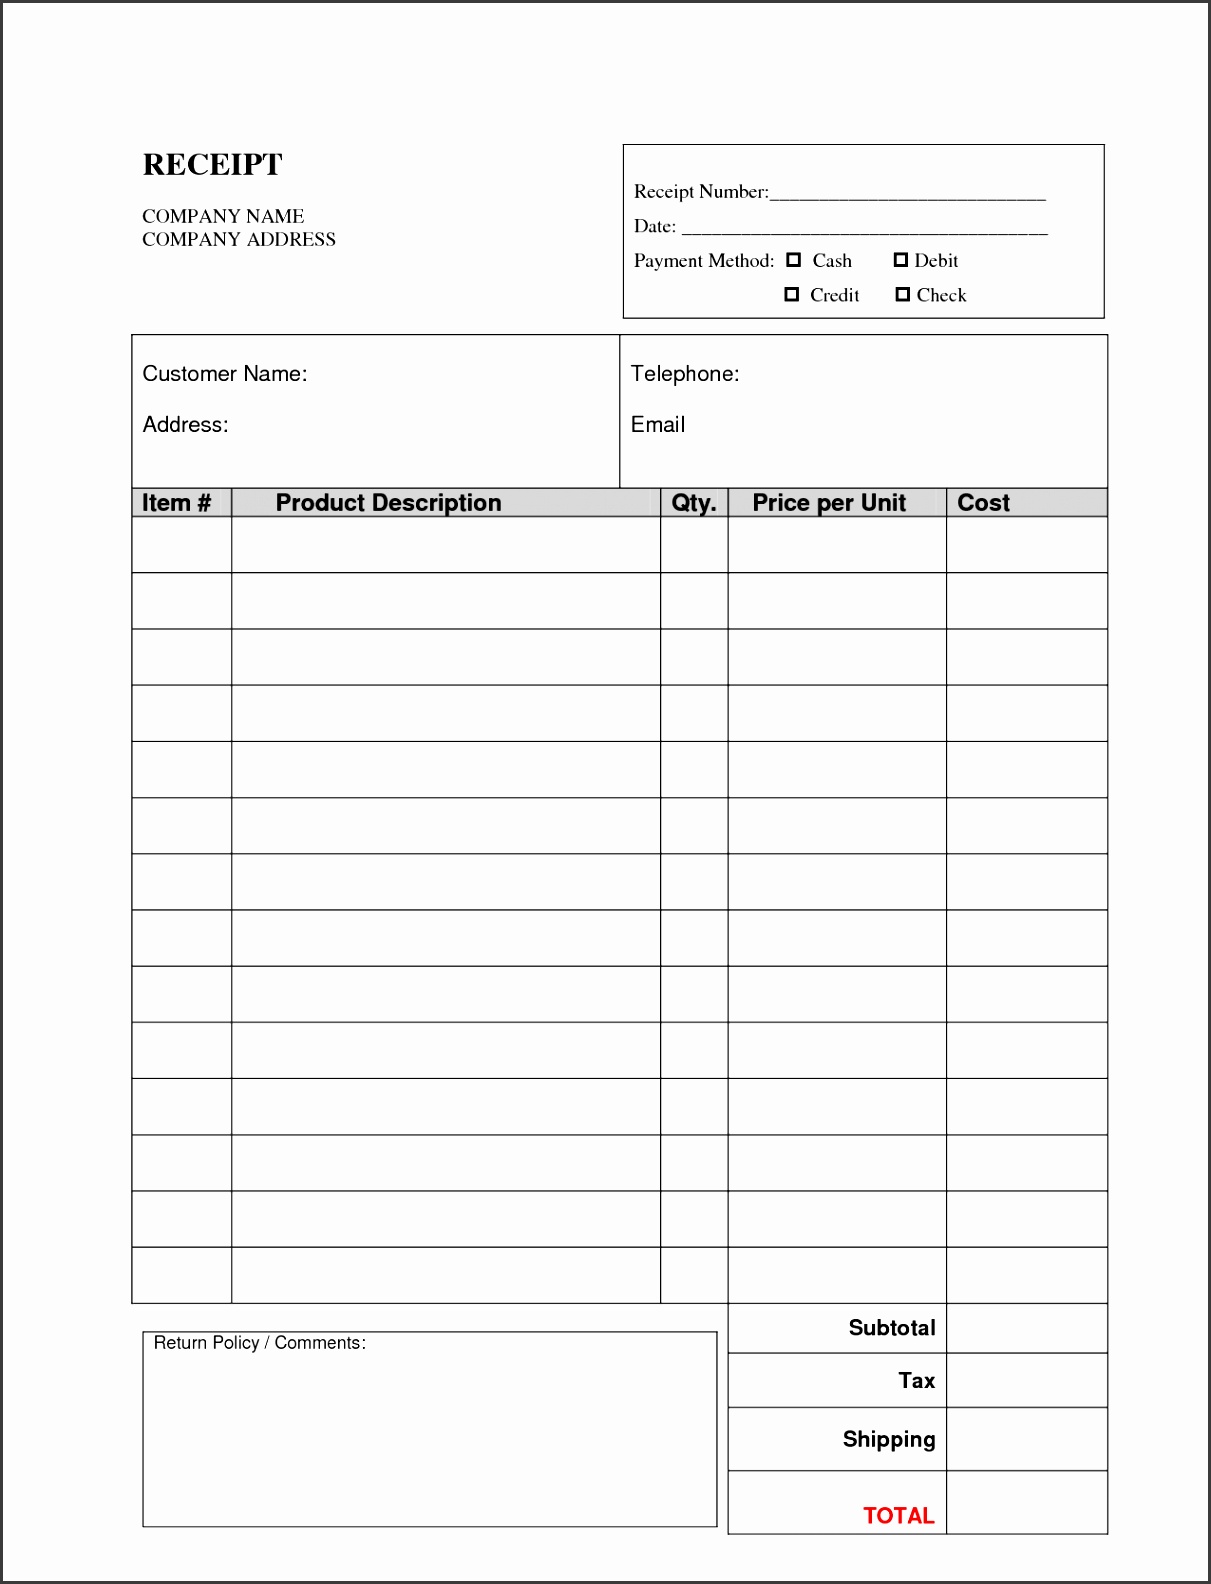 Free Invoice Receipt Template Work For Goods Examples Printable Uk